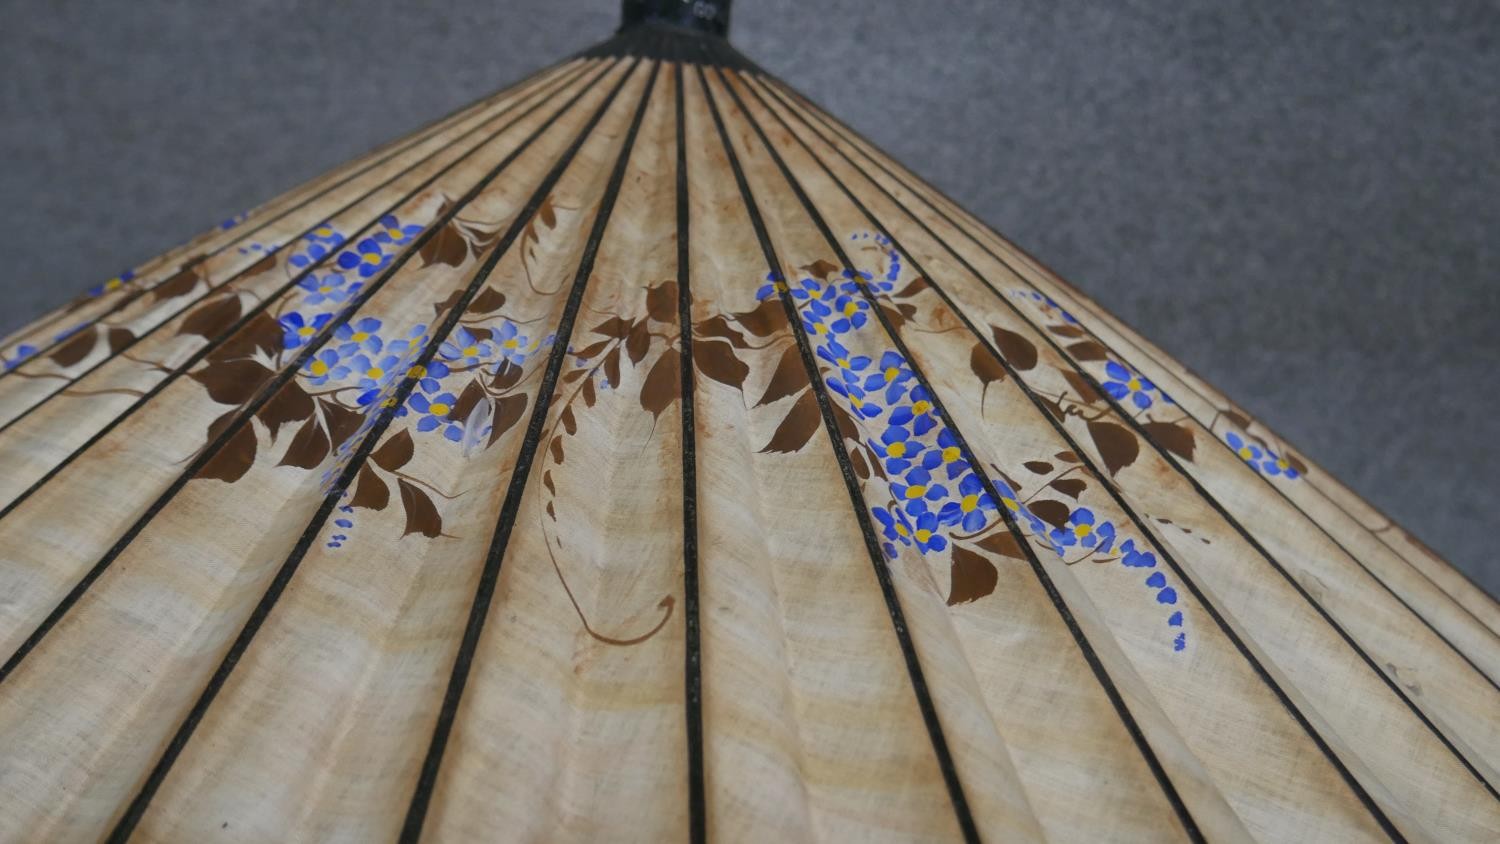 Two antique Chinese parasols, one with a painted wisteria flower design. L.95cm - Image 5 of 5